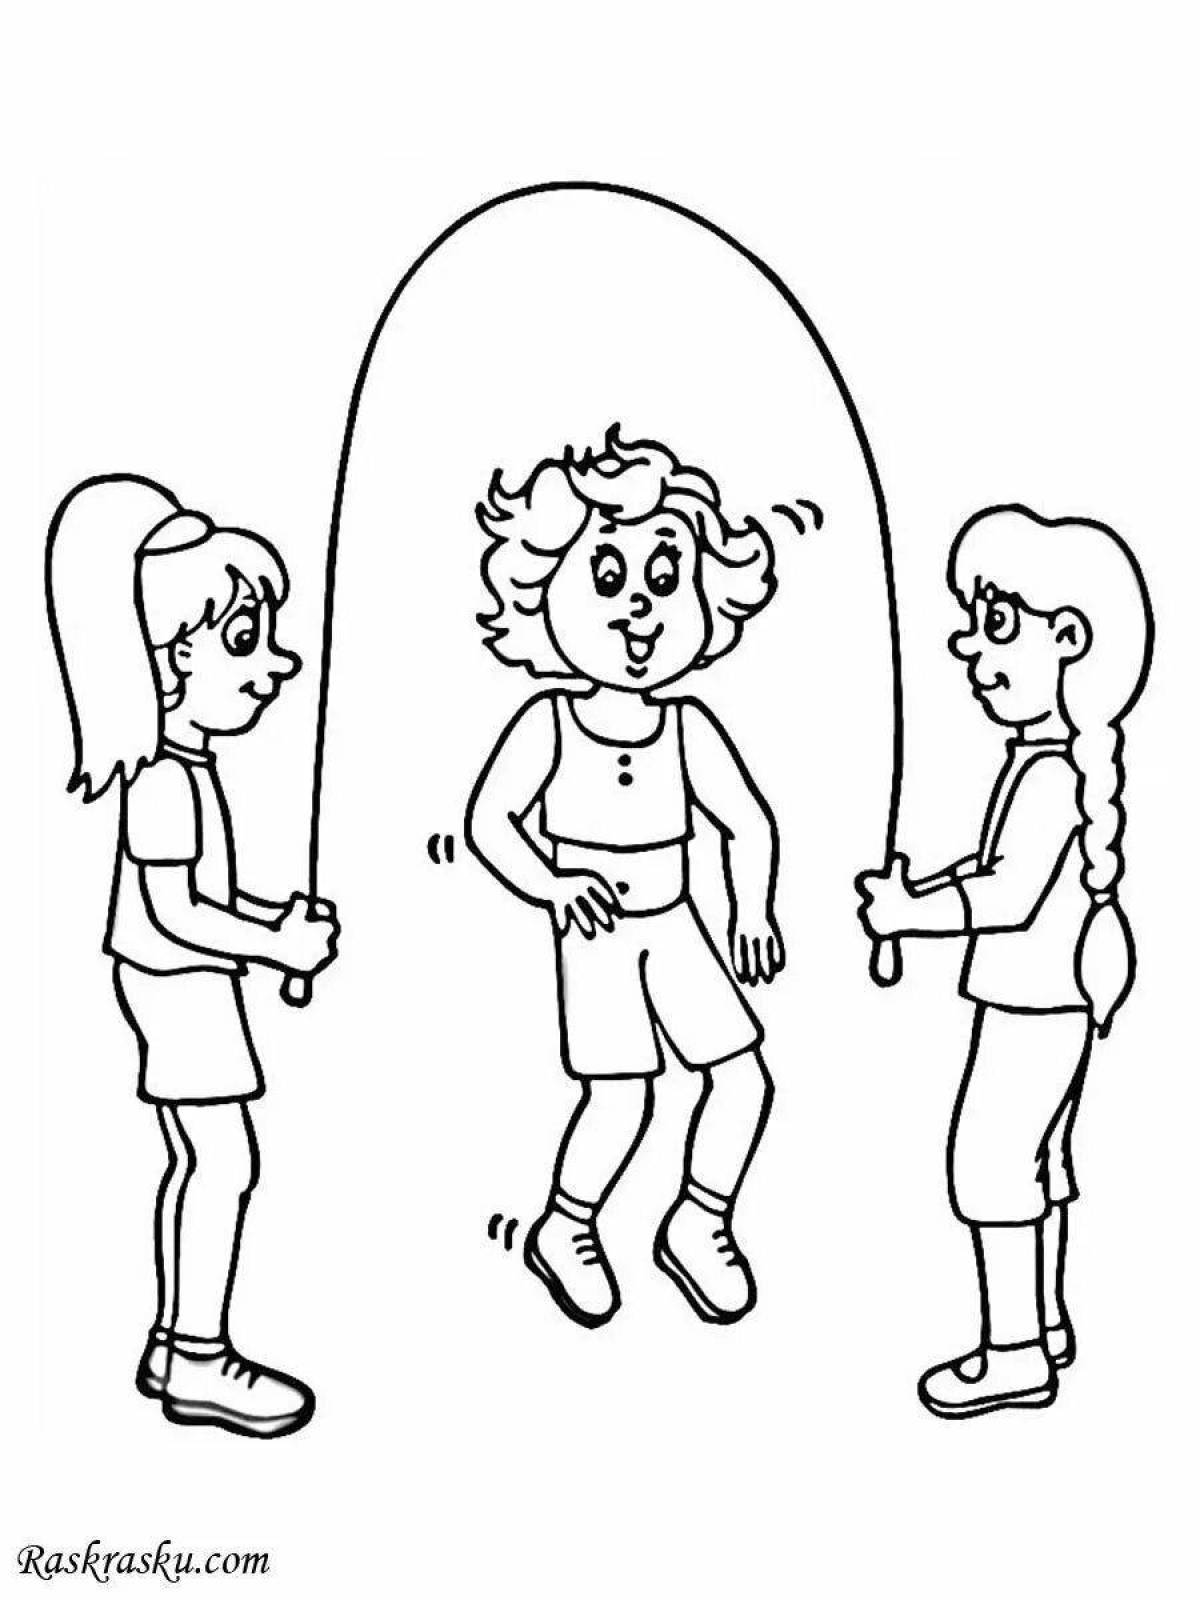 Color-frenzy coloring page kids com